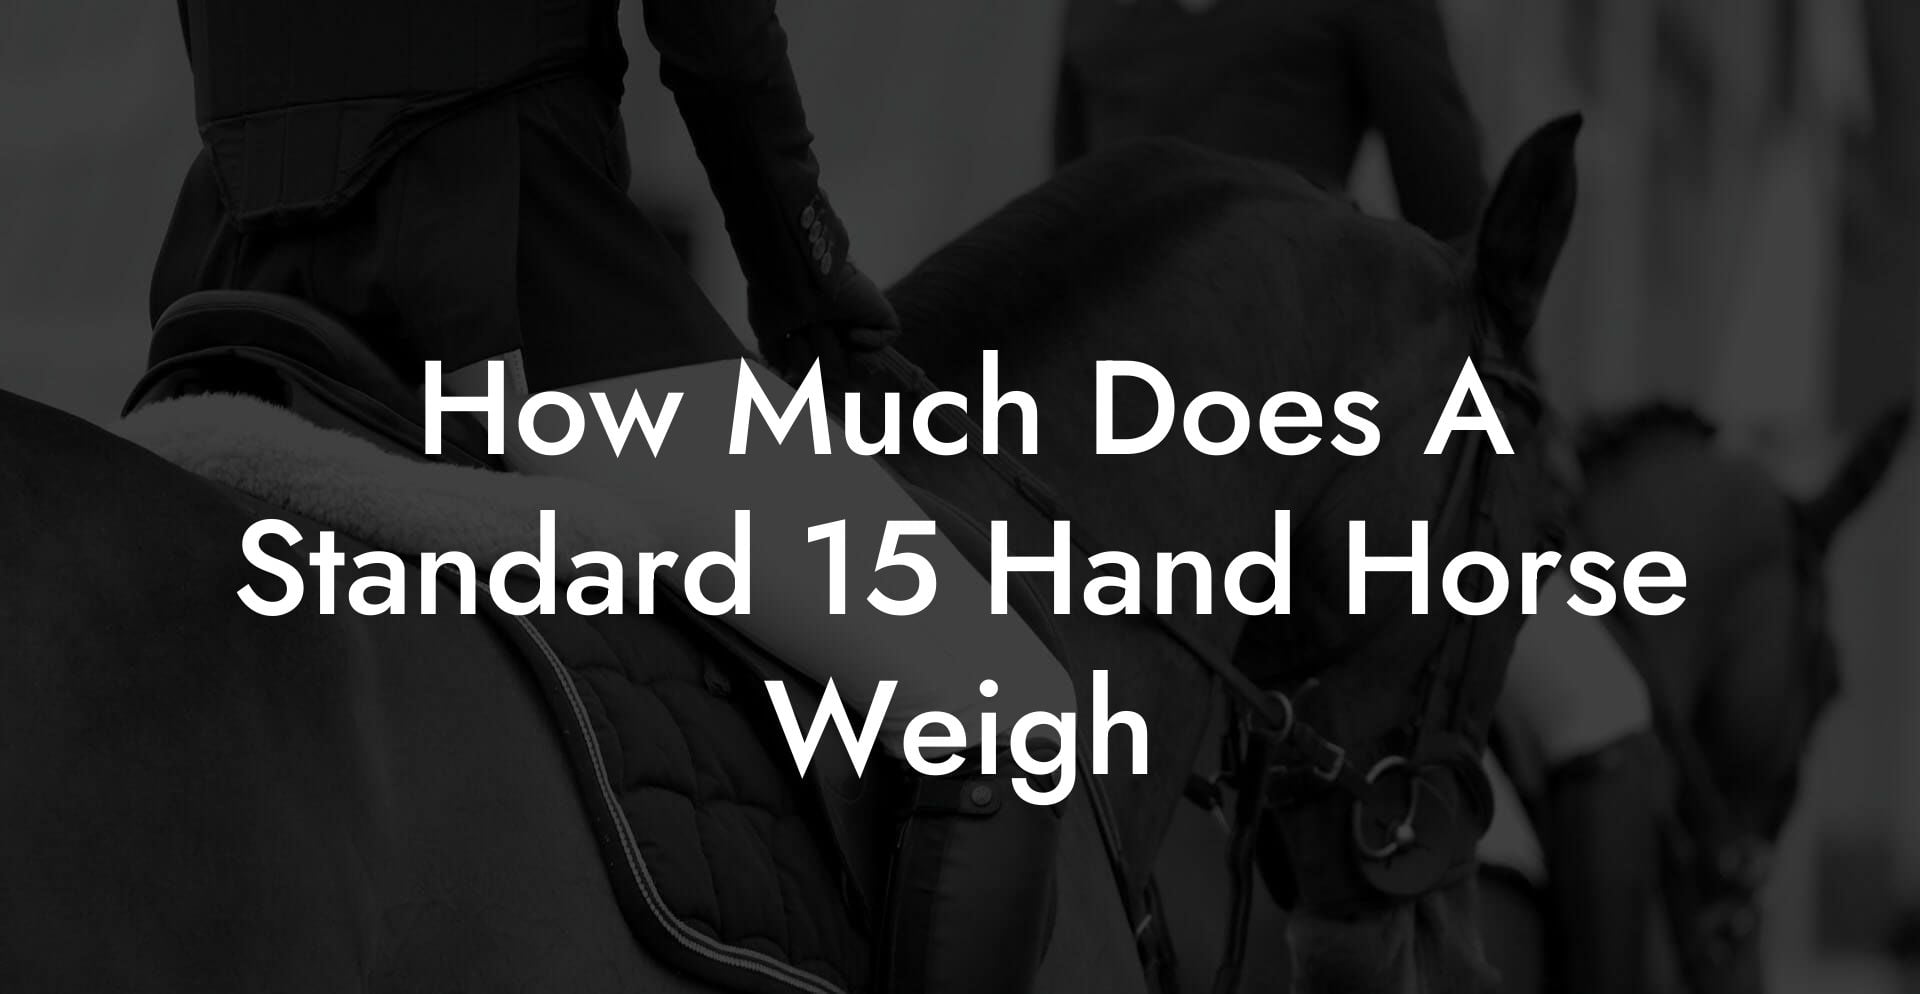 How Much Does A Standard 15 Hand Horse Weigh